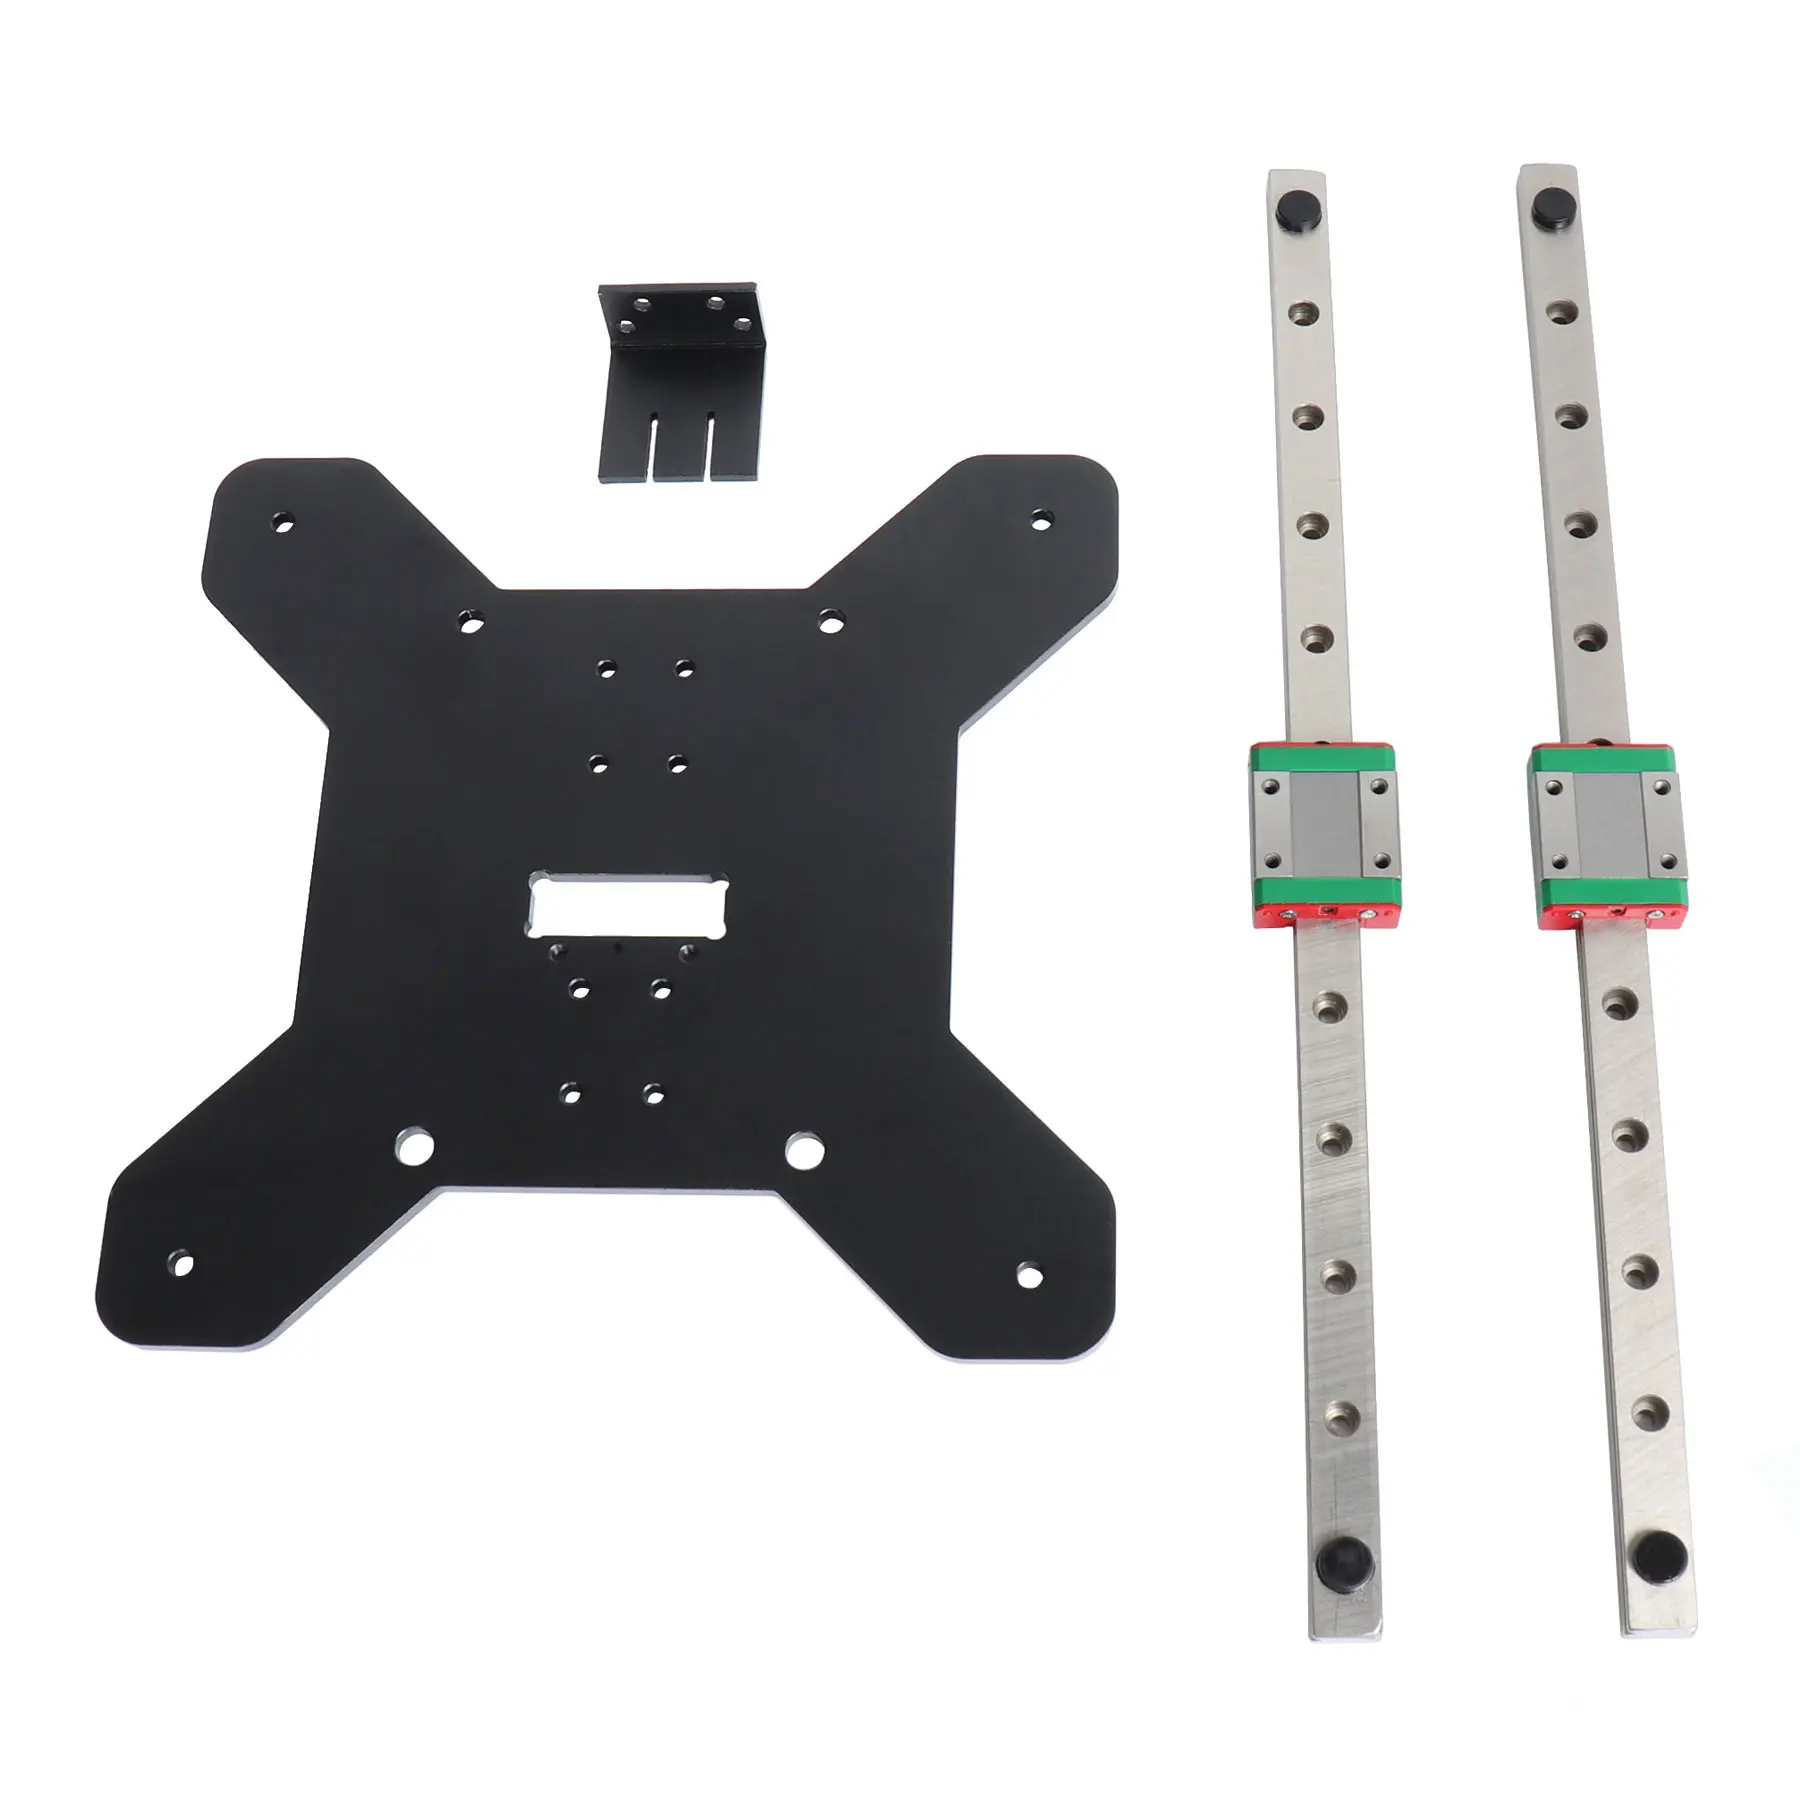 

Blurolls KP3S Pro Upgrated Parts Y Axis Hotend Bracket Kit for Kingroon 3D Printers 300mm Hiwin MGN12C Linear Guide Rails